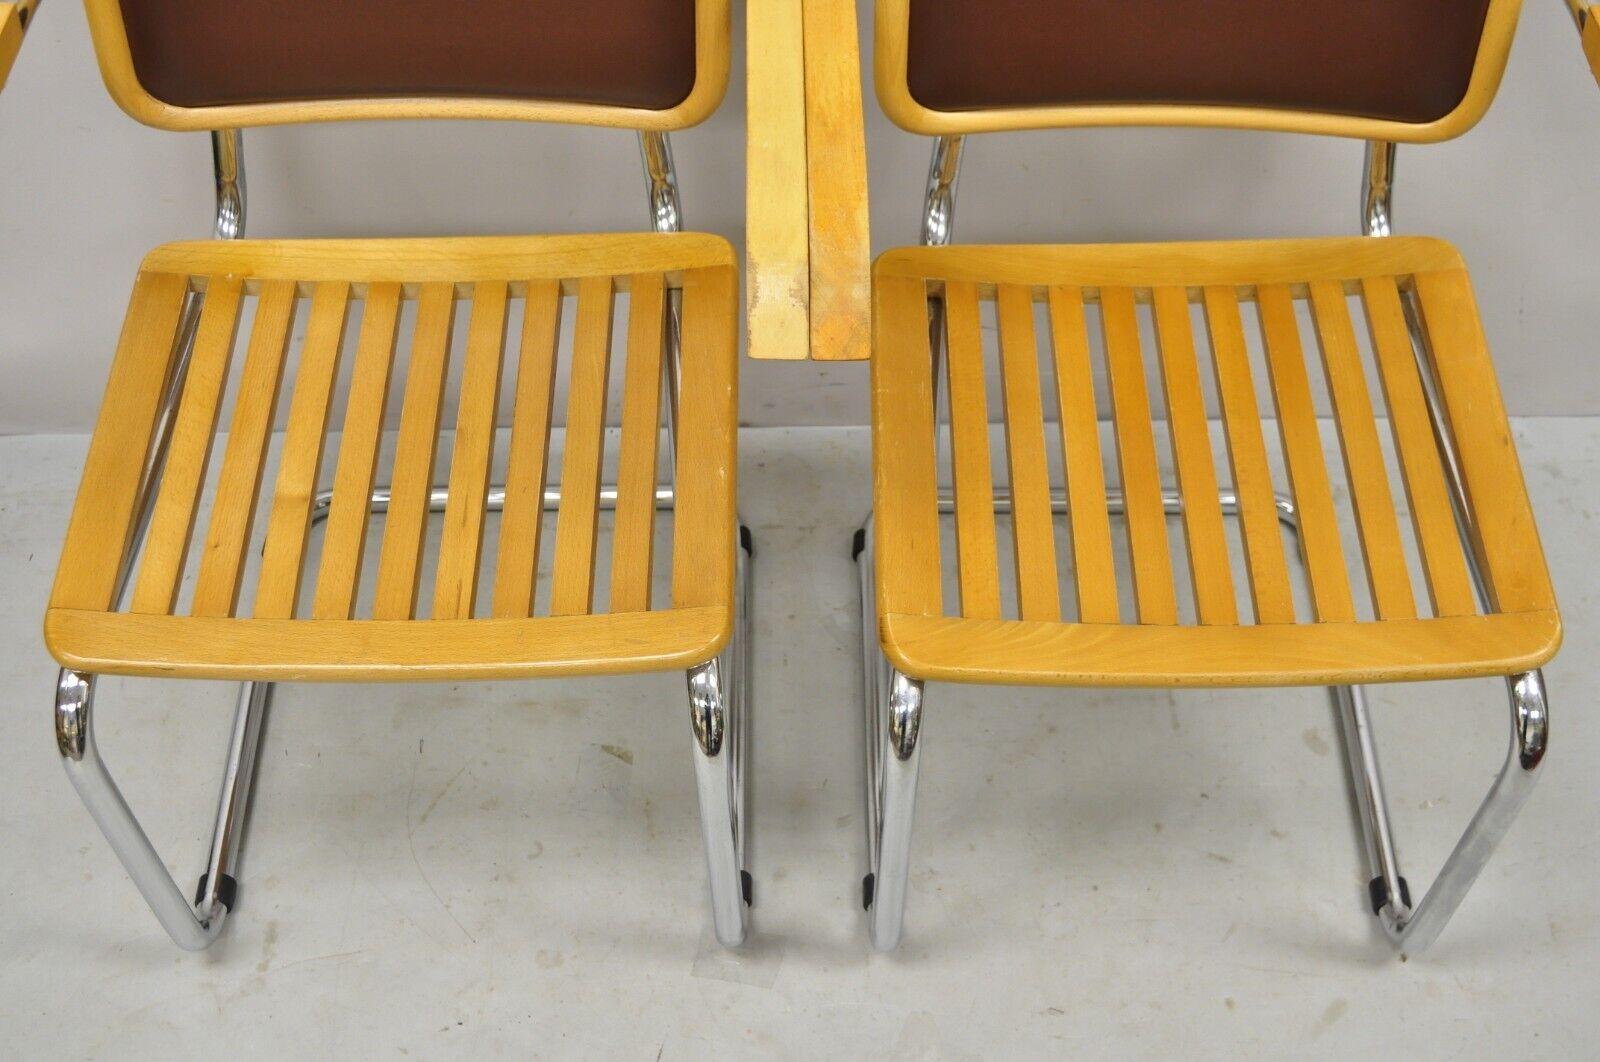 Marcel Breuer Cesca Chair Cantilever Chrome Frame Wood Seat, a Pair In Good Condition For Sale In Philadelphia, PA